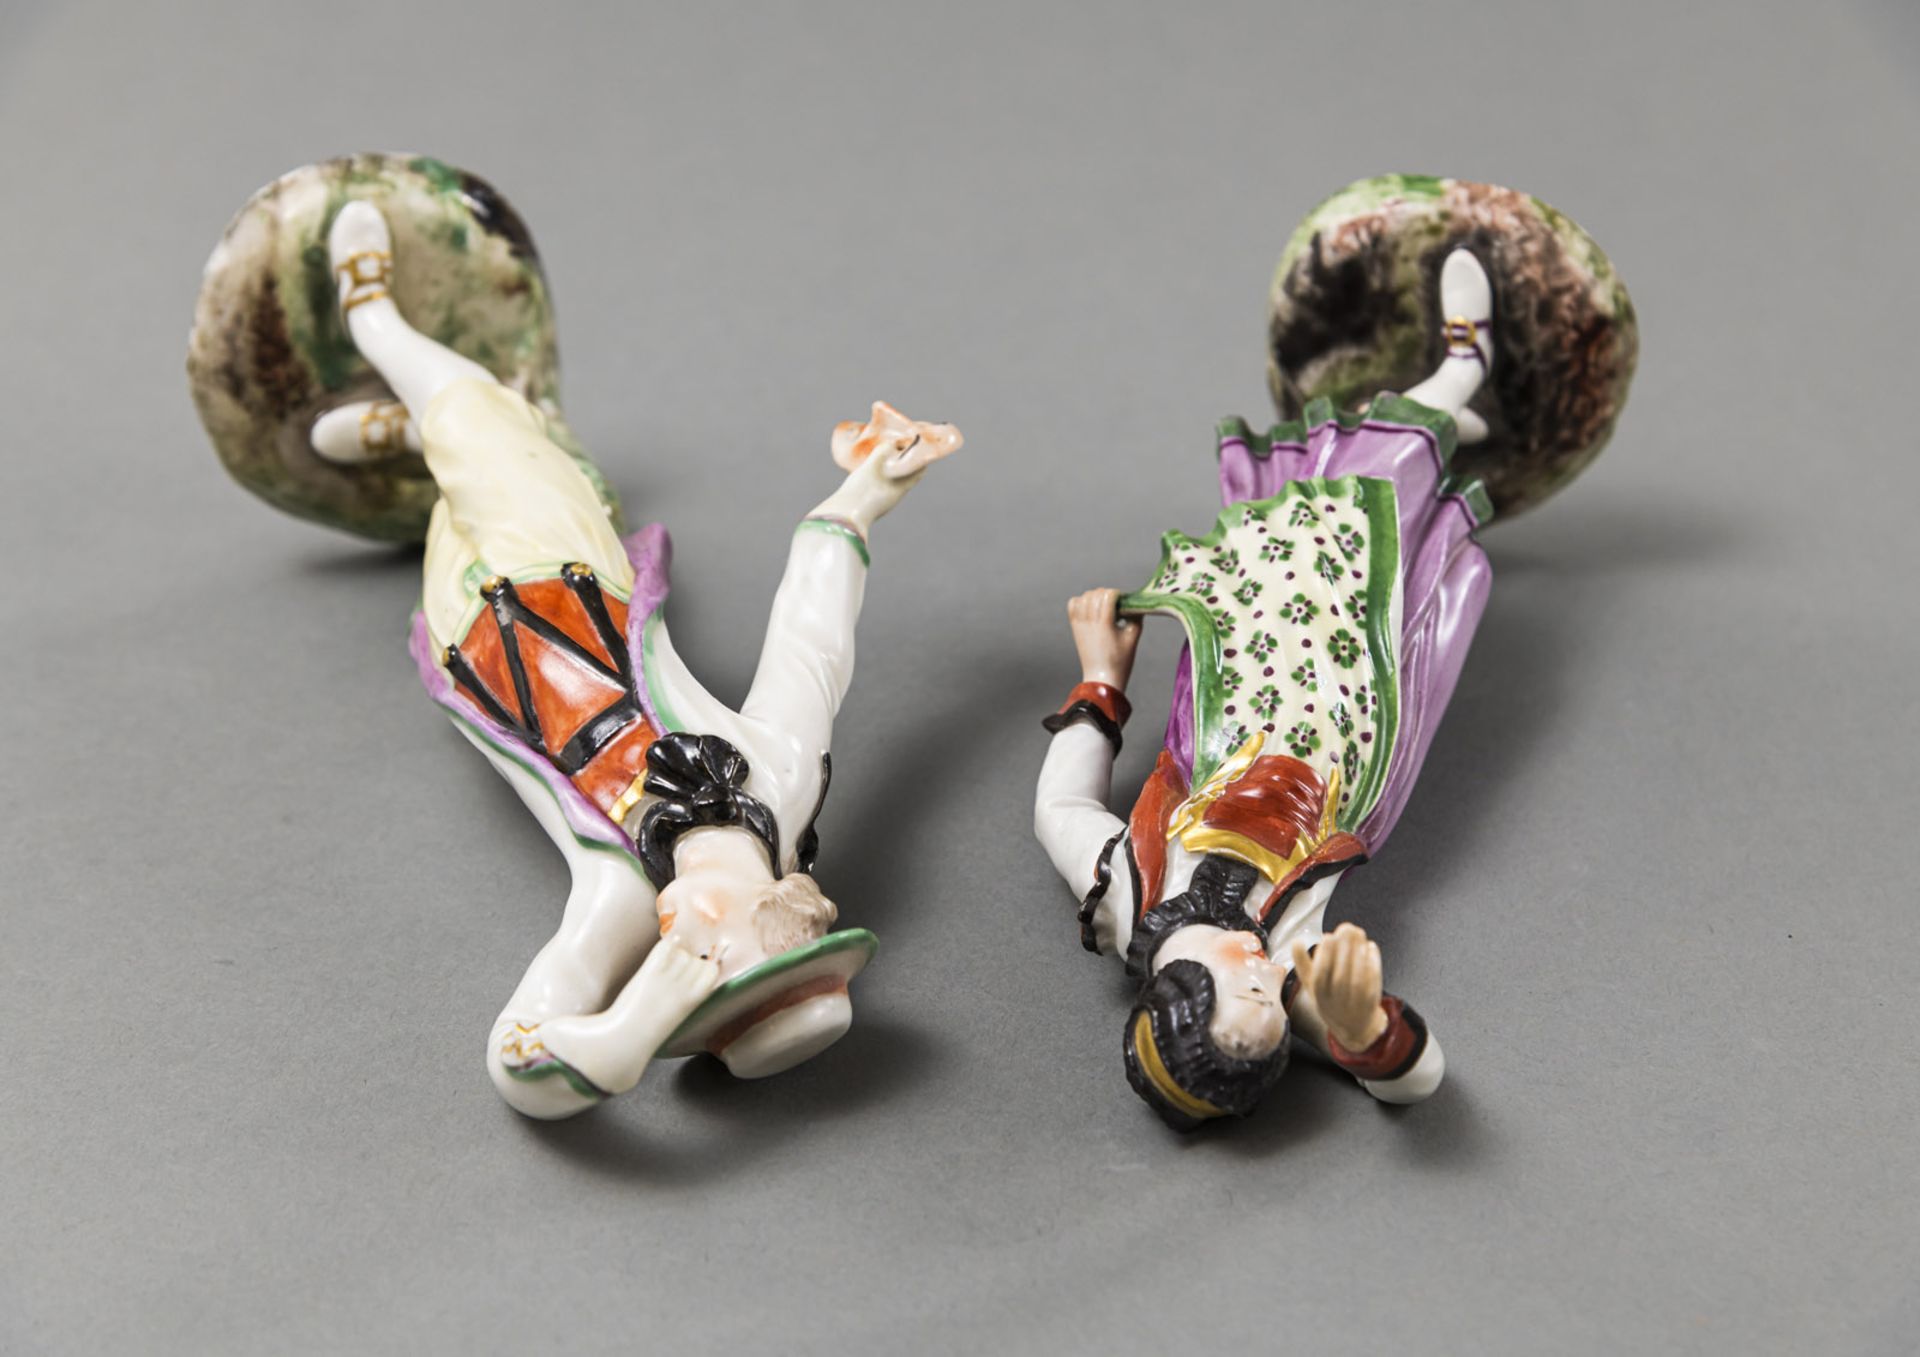 A LUDWIGSBURG PAIR OF PORCELAIN DANCERS - Image 4 of 5